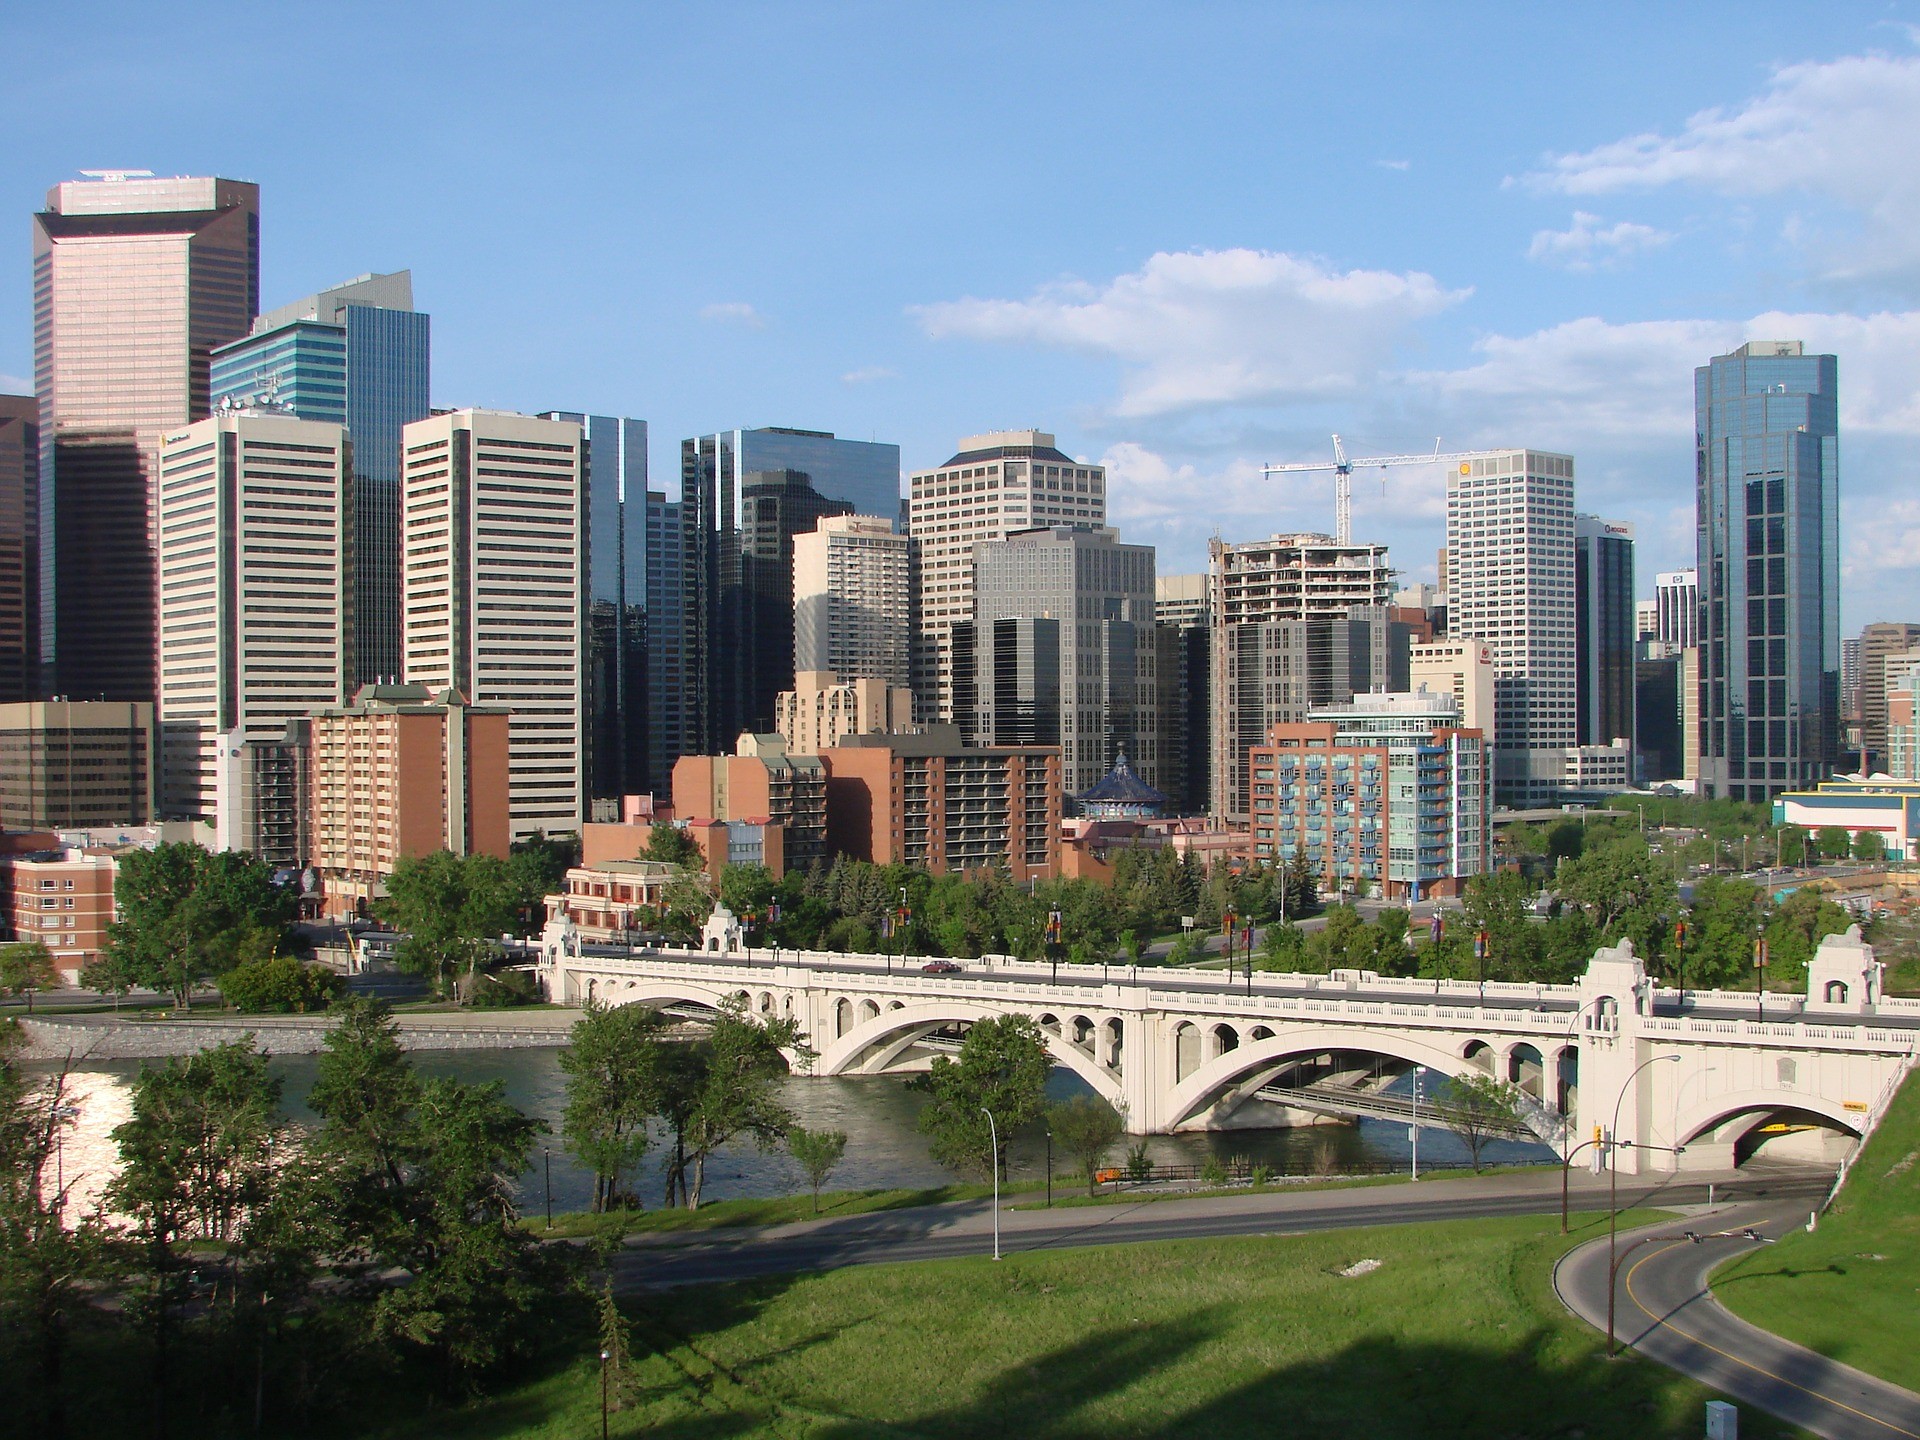 a daytime view of the Calgary, Alberta skyline and a pedestrian bridge over the Bow River